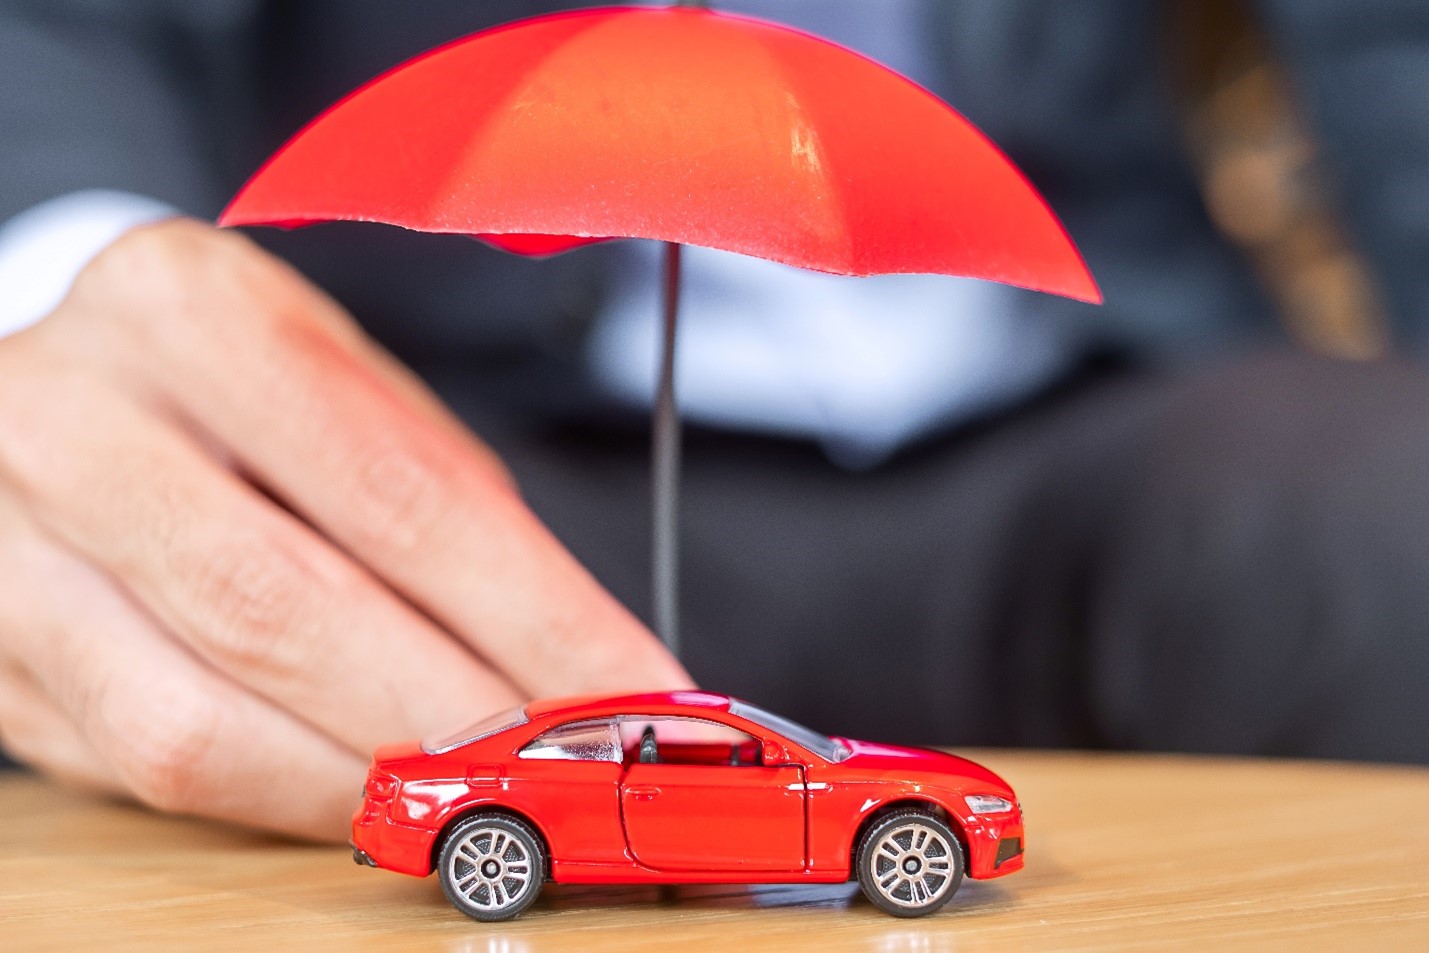 Red toy car under a red umbrella, meant to convey how auto insurance covers damages to a car and its occupants. 